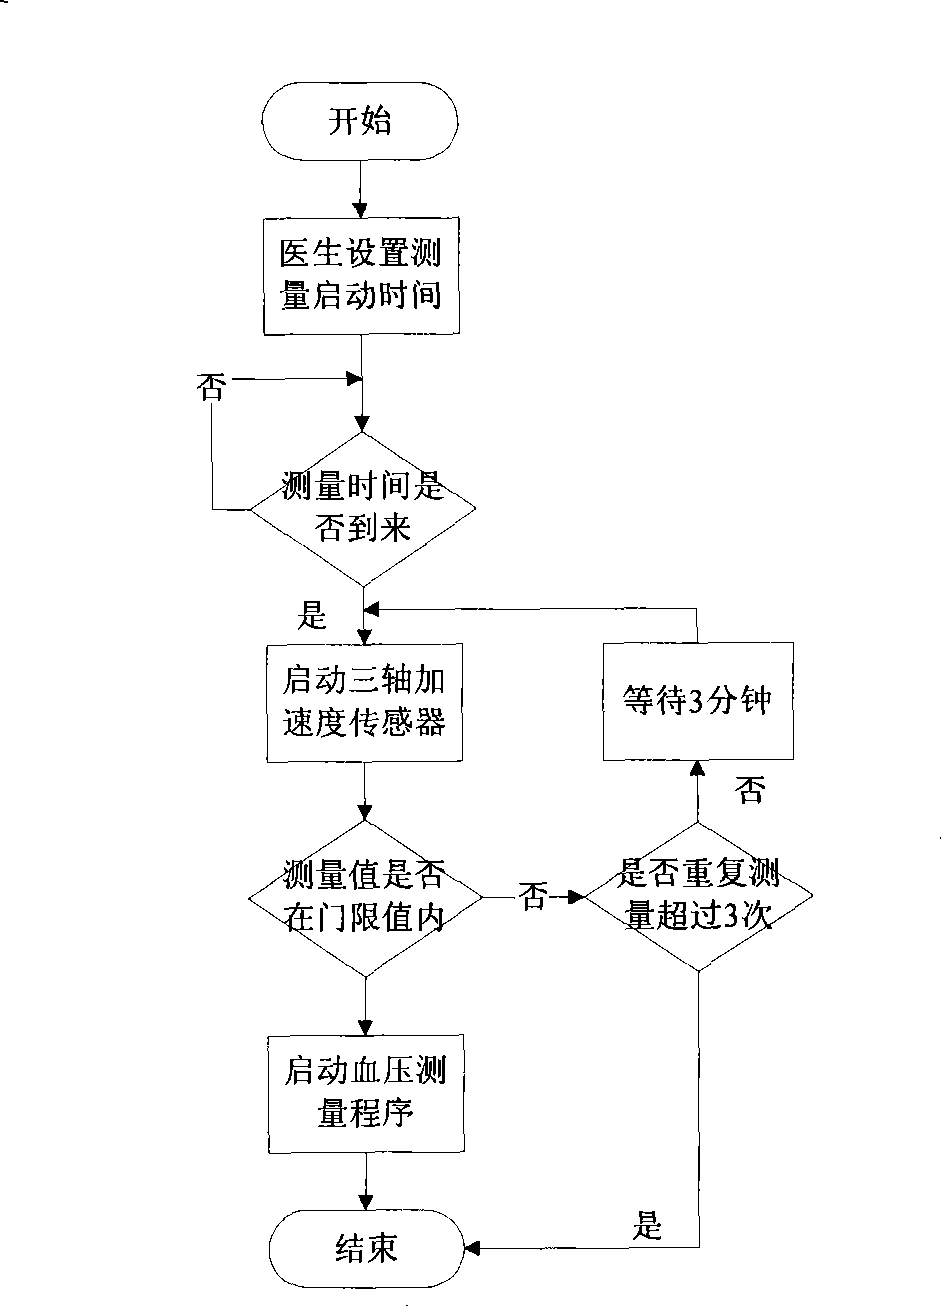 Method and system of blood pressure real time monitoring and remote timely service with acceleration sensor